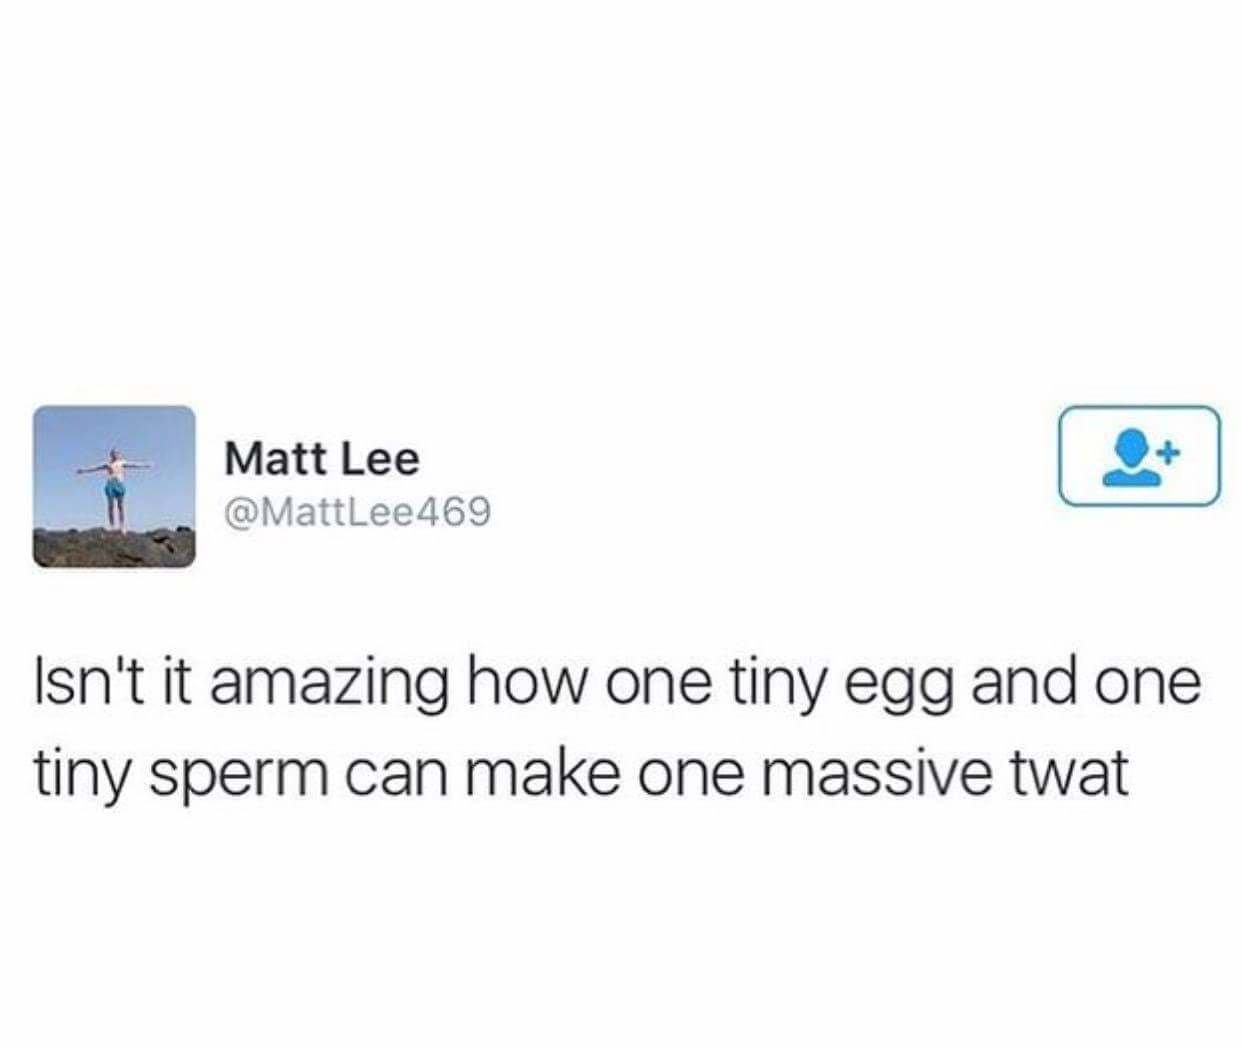 multimedia - Matt Lee 469 Isn't it amazing how one tiny egg and one tiny sperm can make one massive twat